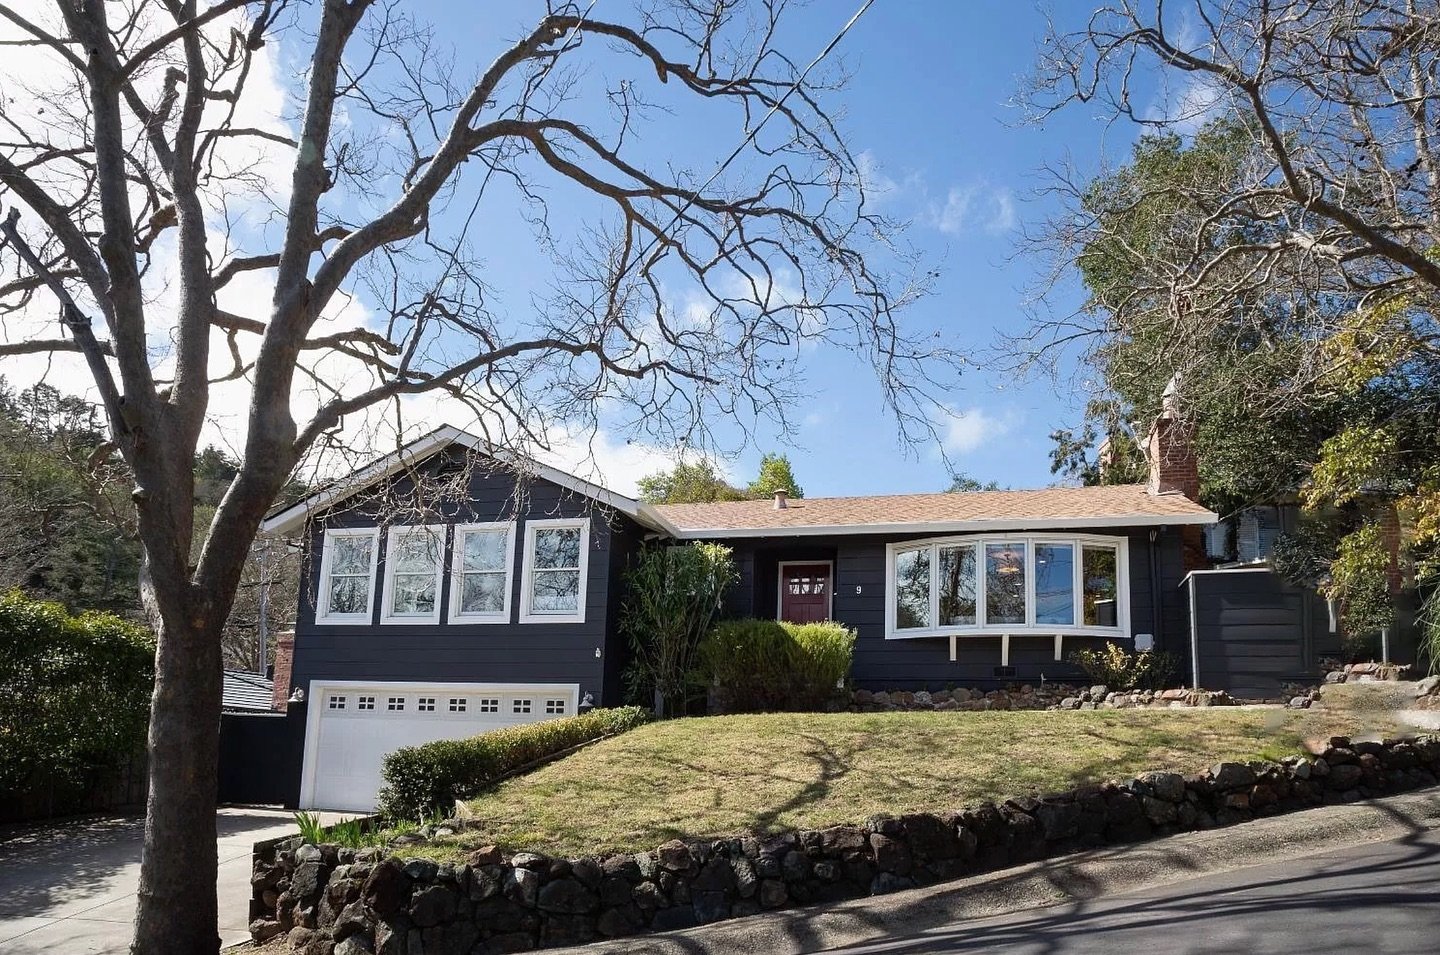 SOLD - San Anselmo native finds his way back home... Big congratulations to our first time home Buyers in finding their forever home in &ldquo;The Hollow&rdquo;. After tireless negotiations, we closed at 11% under the asking price and it couldn&rsquo